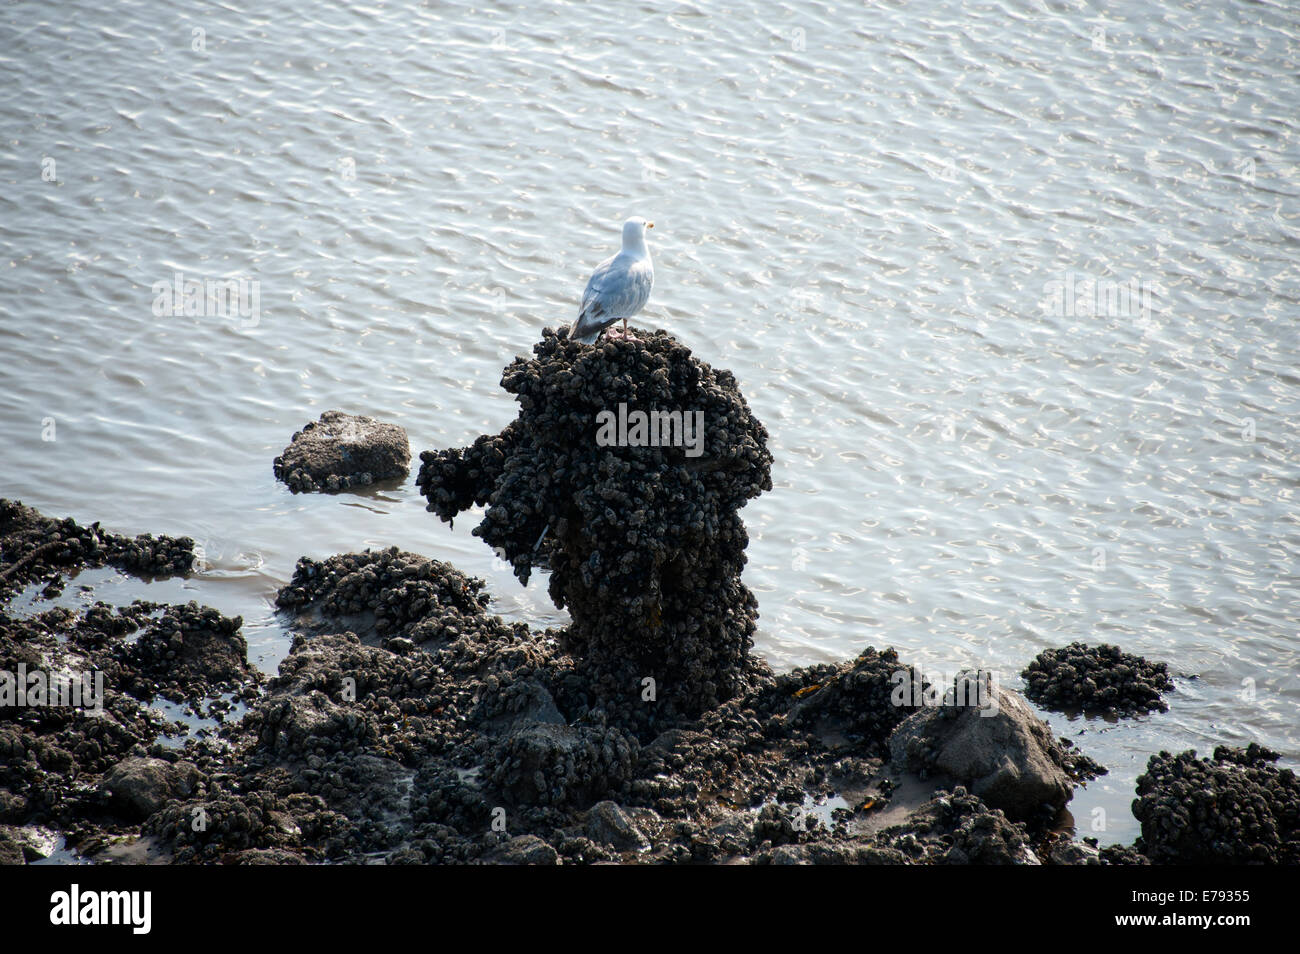 Seagull Water Mussels Bed River Saltwater Stock Photo